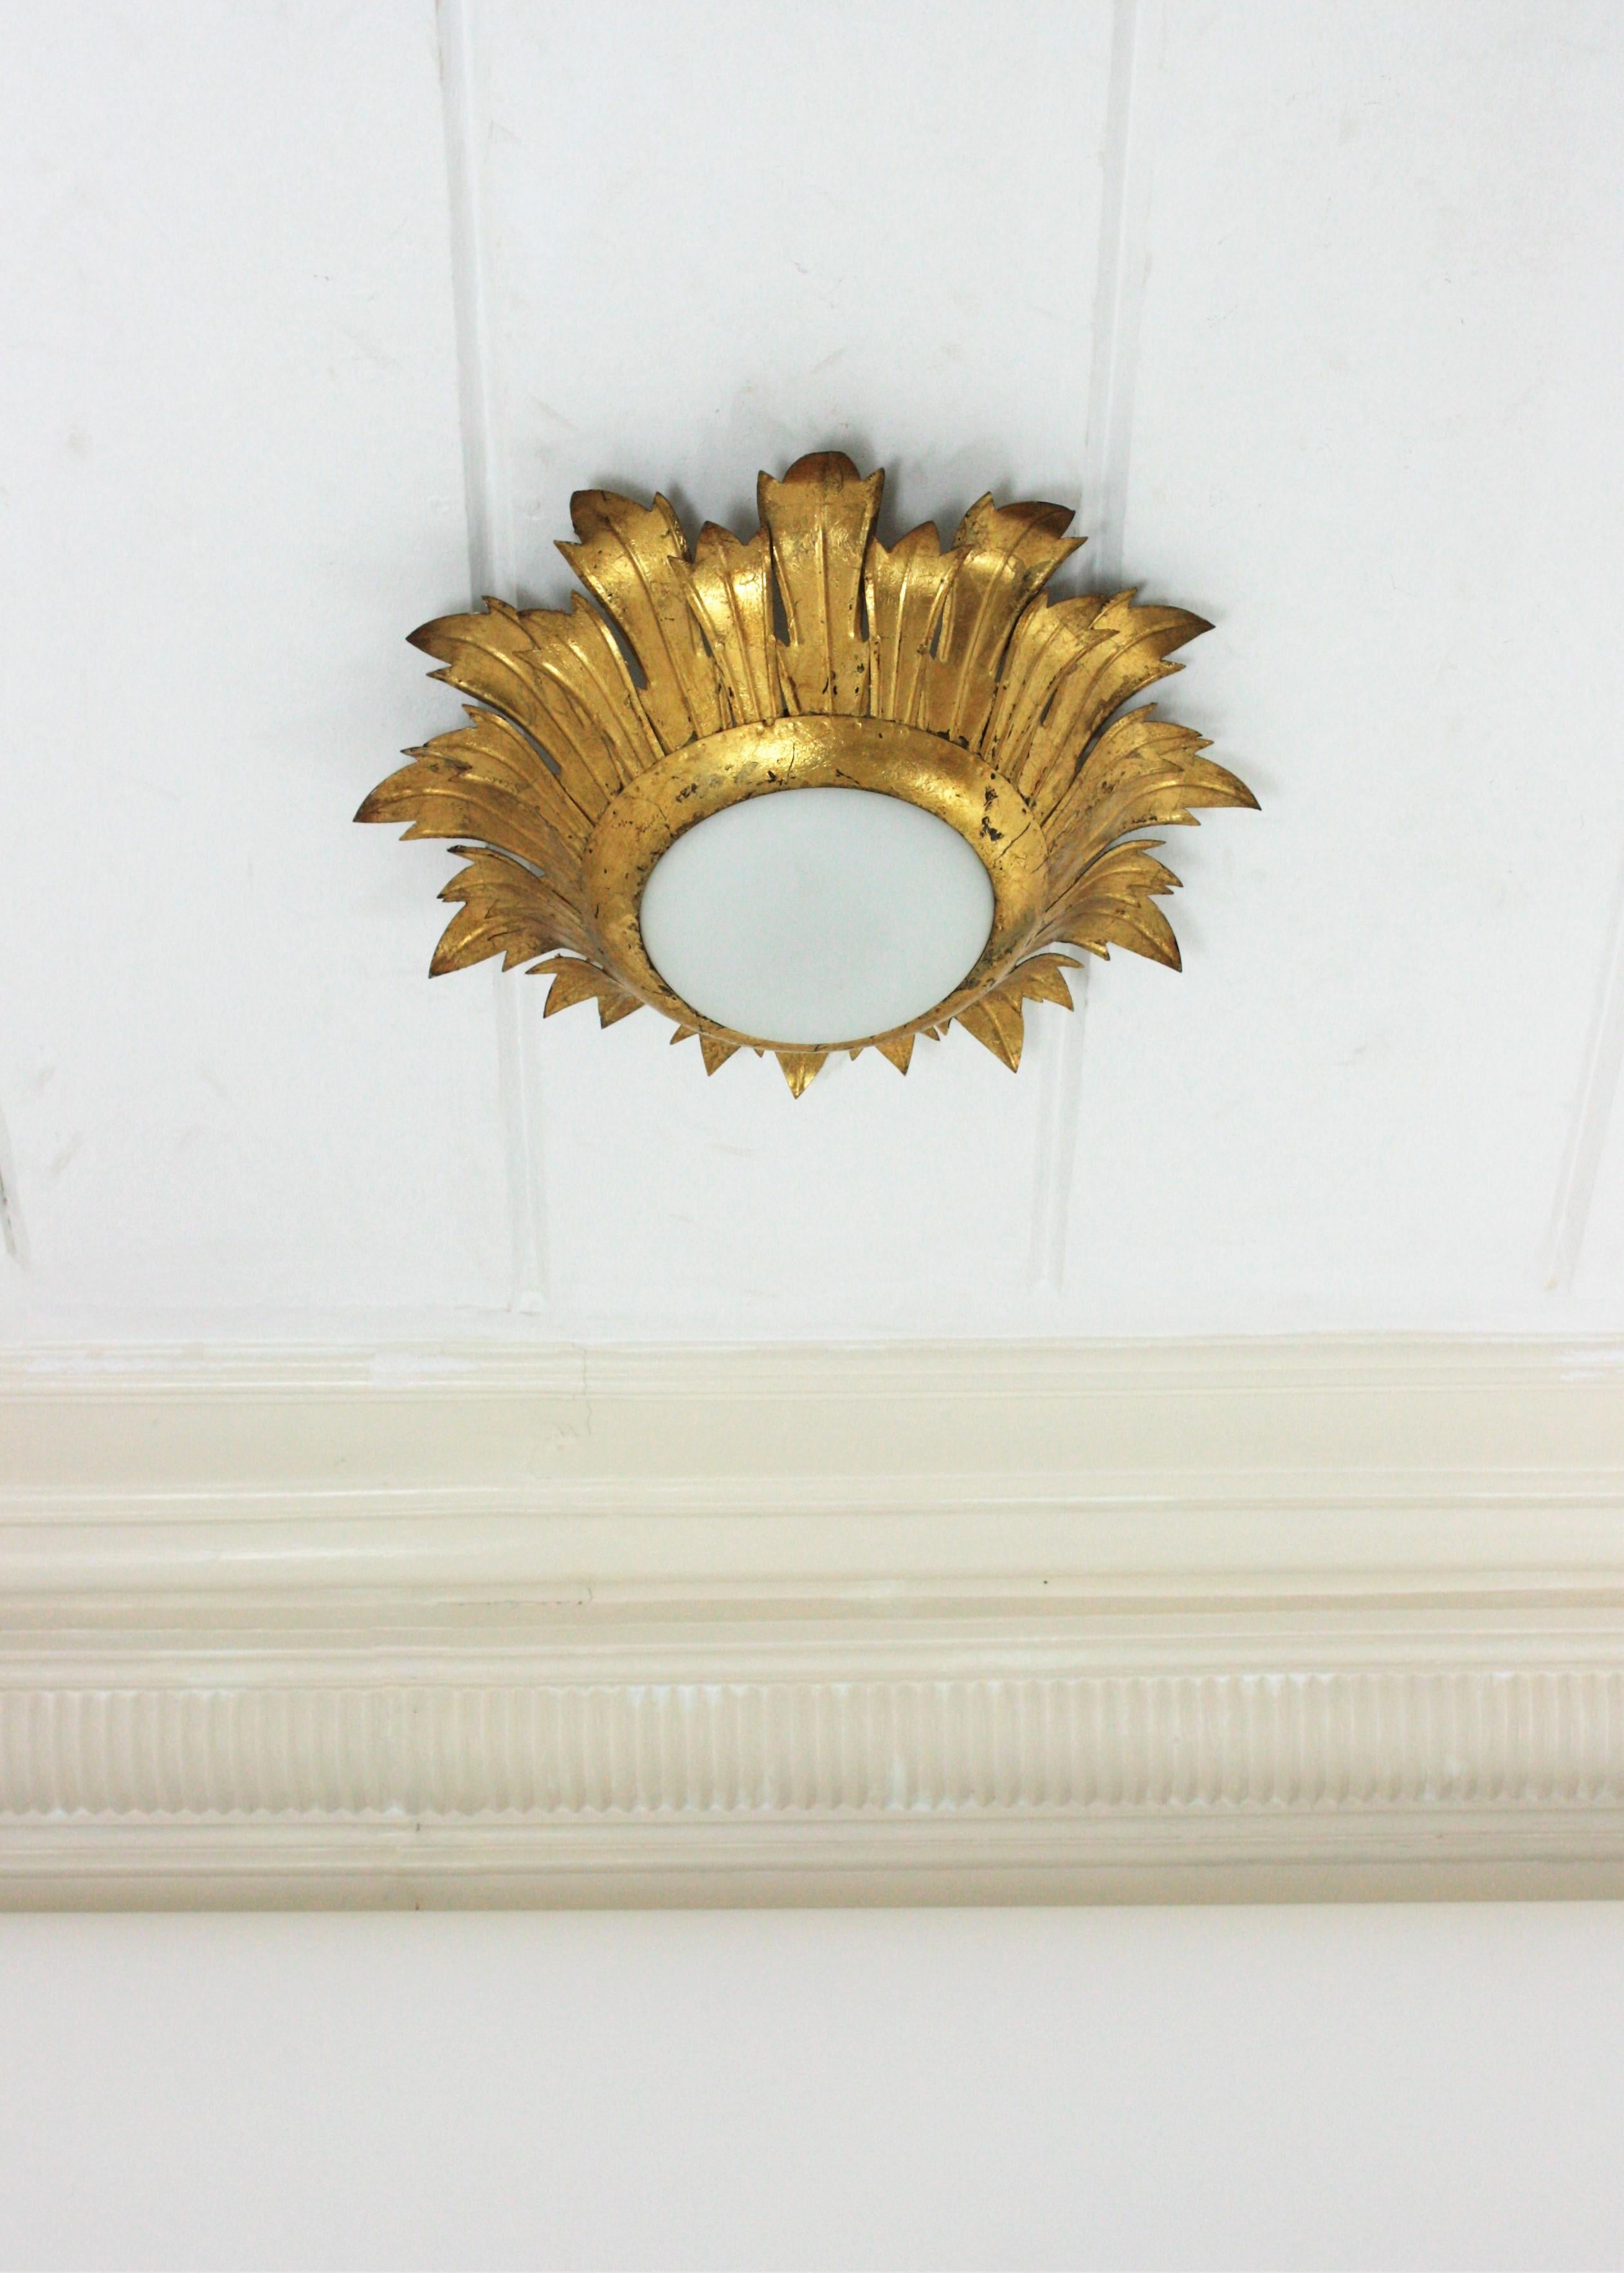 Sunburst leafed flush mount in gold gilt iron with milk glass shade. Spain, 1950s
This light fixture features an opaline glass circular shade surrounded by hand-hammered leafed sunburst frame.
Nice aged patina showing its original gold leaf